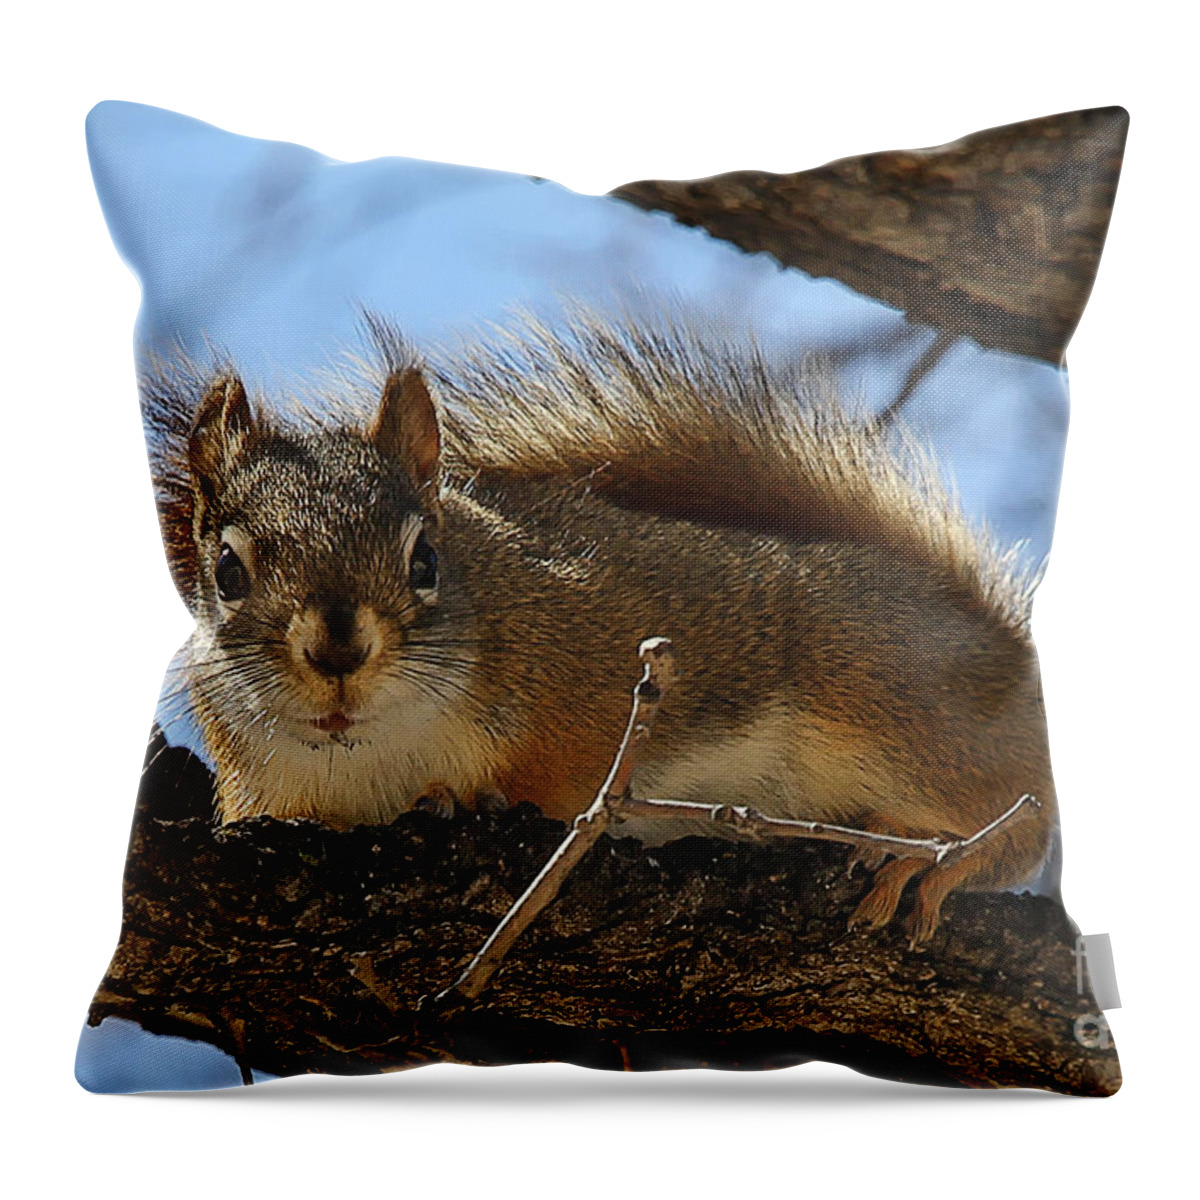 Animal Throw Pillow featuring the photograph Curious Squirrel by Teresa Zieba